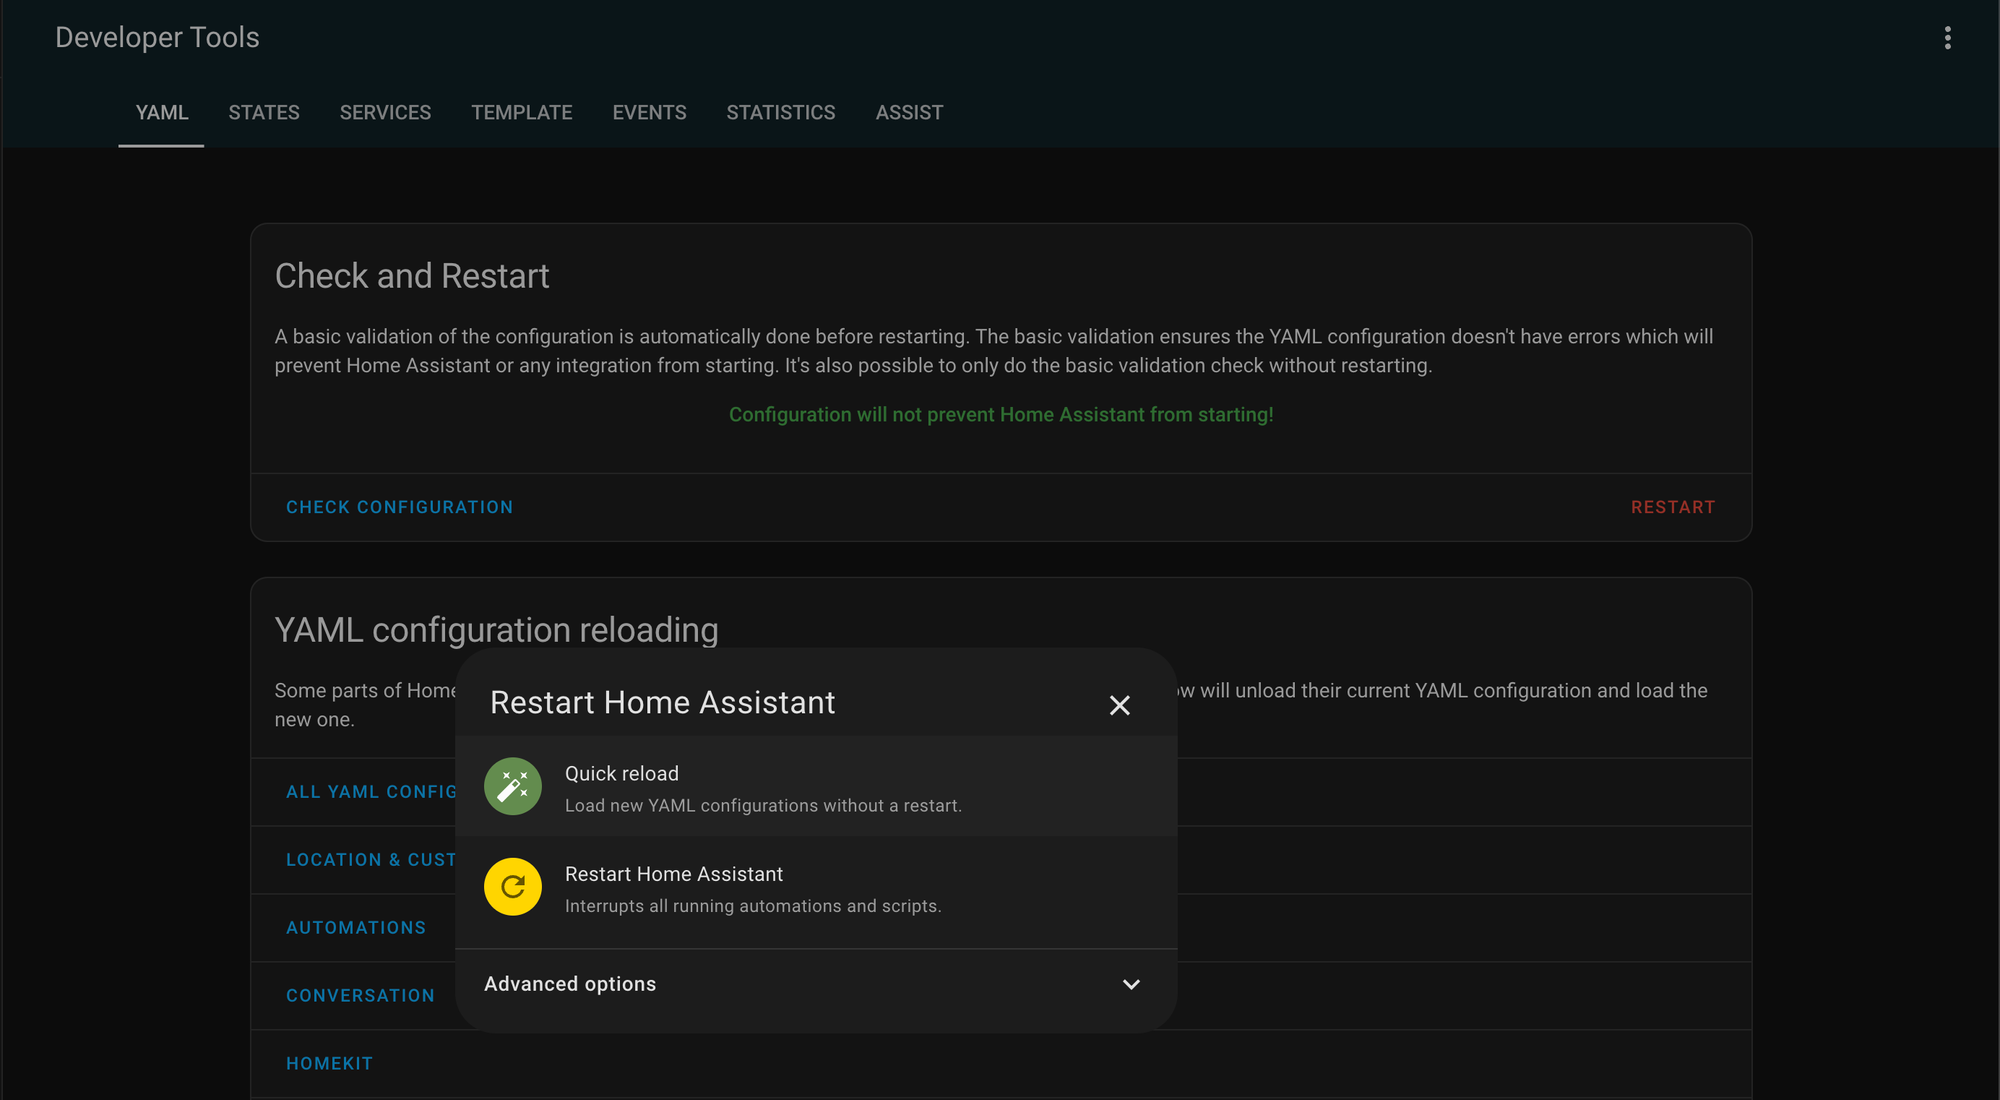 A screenshot of Home Assistant Developer Tools window with Restart Home Assistant modal open and Quick reload hovered over.